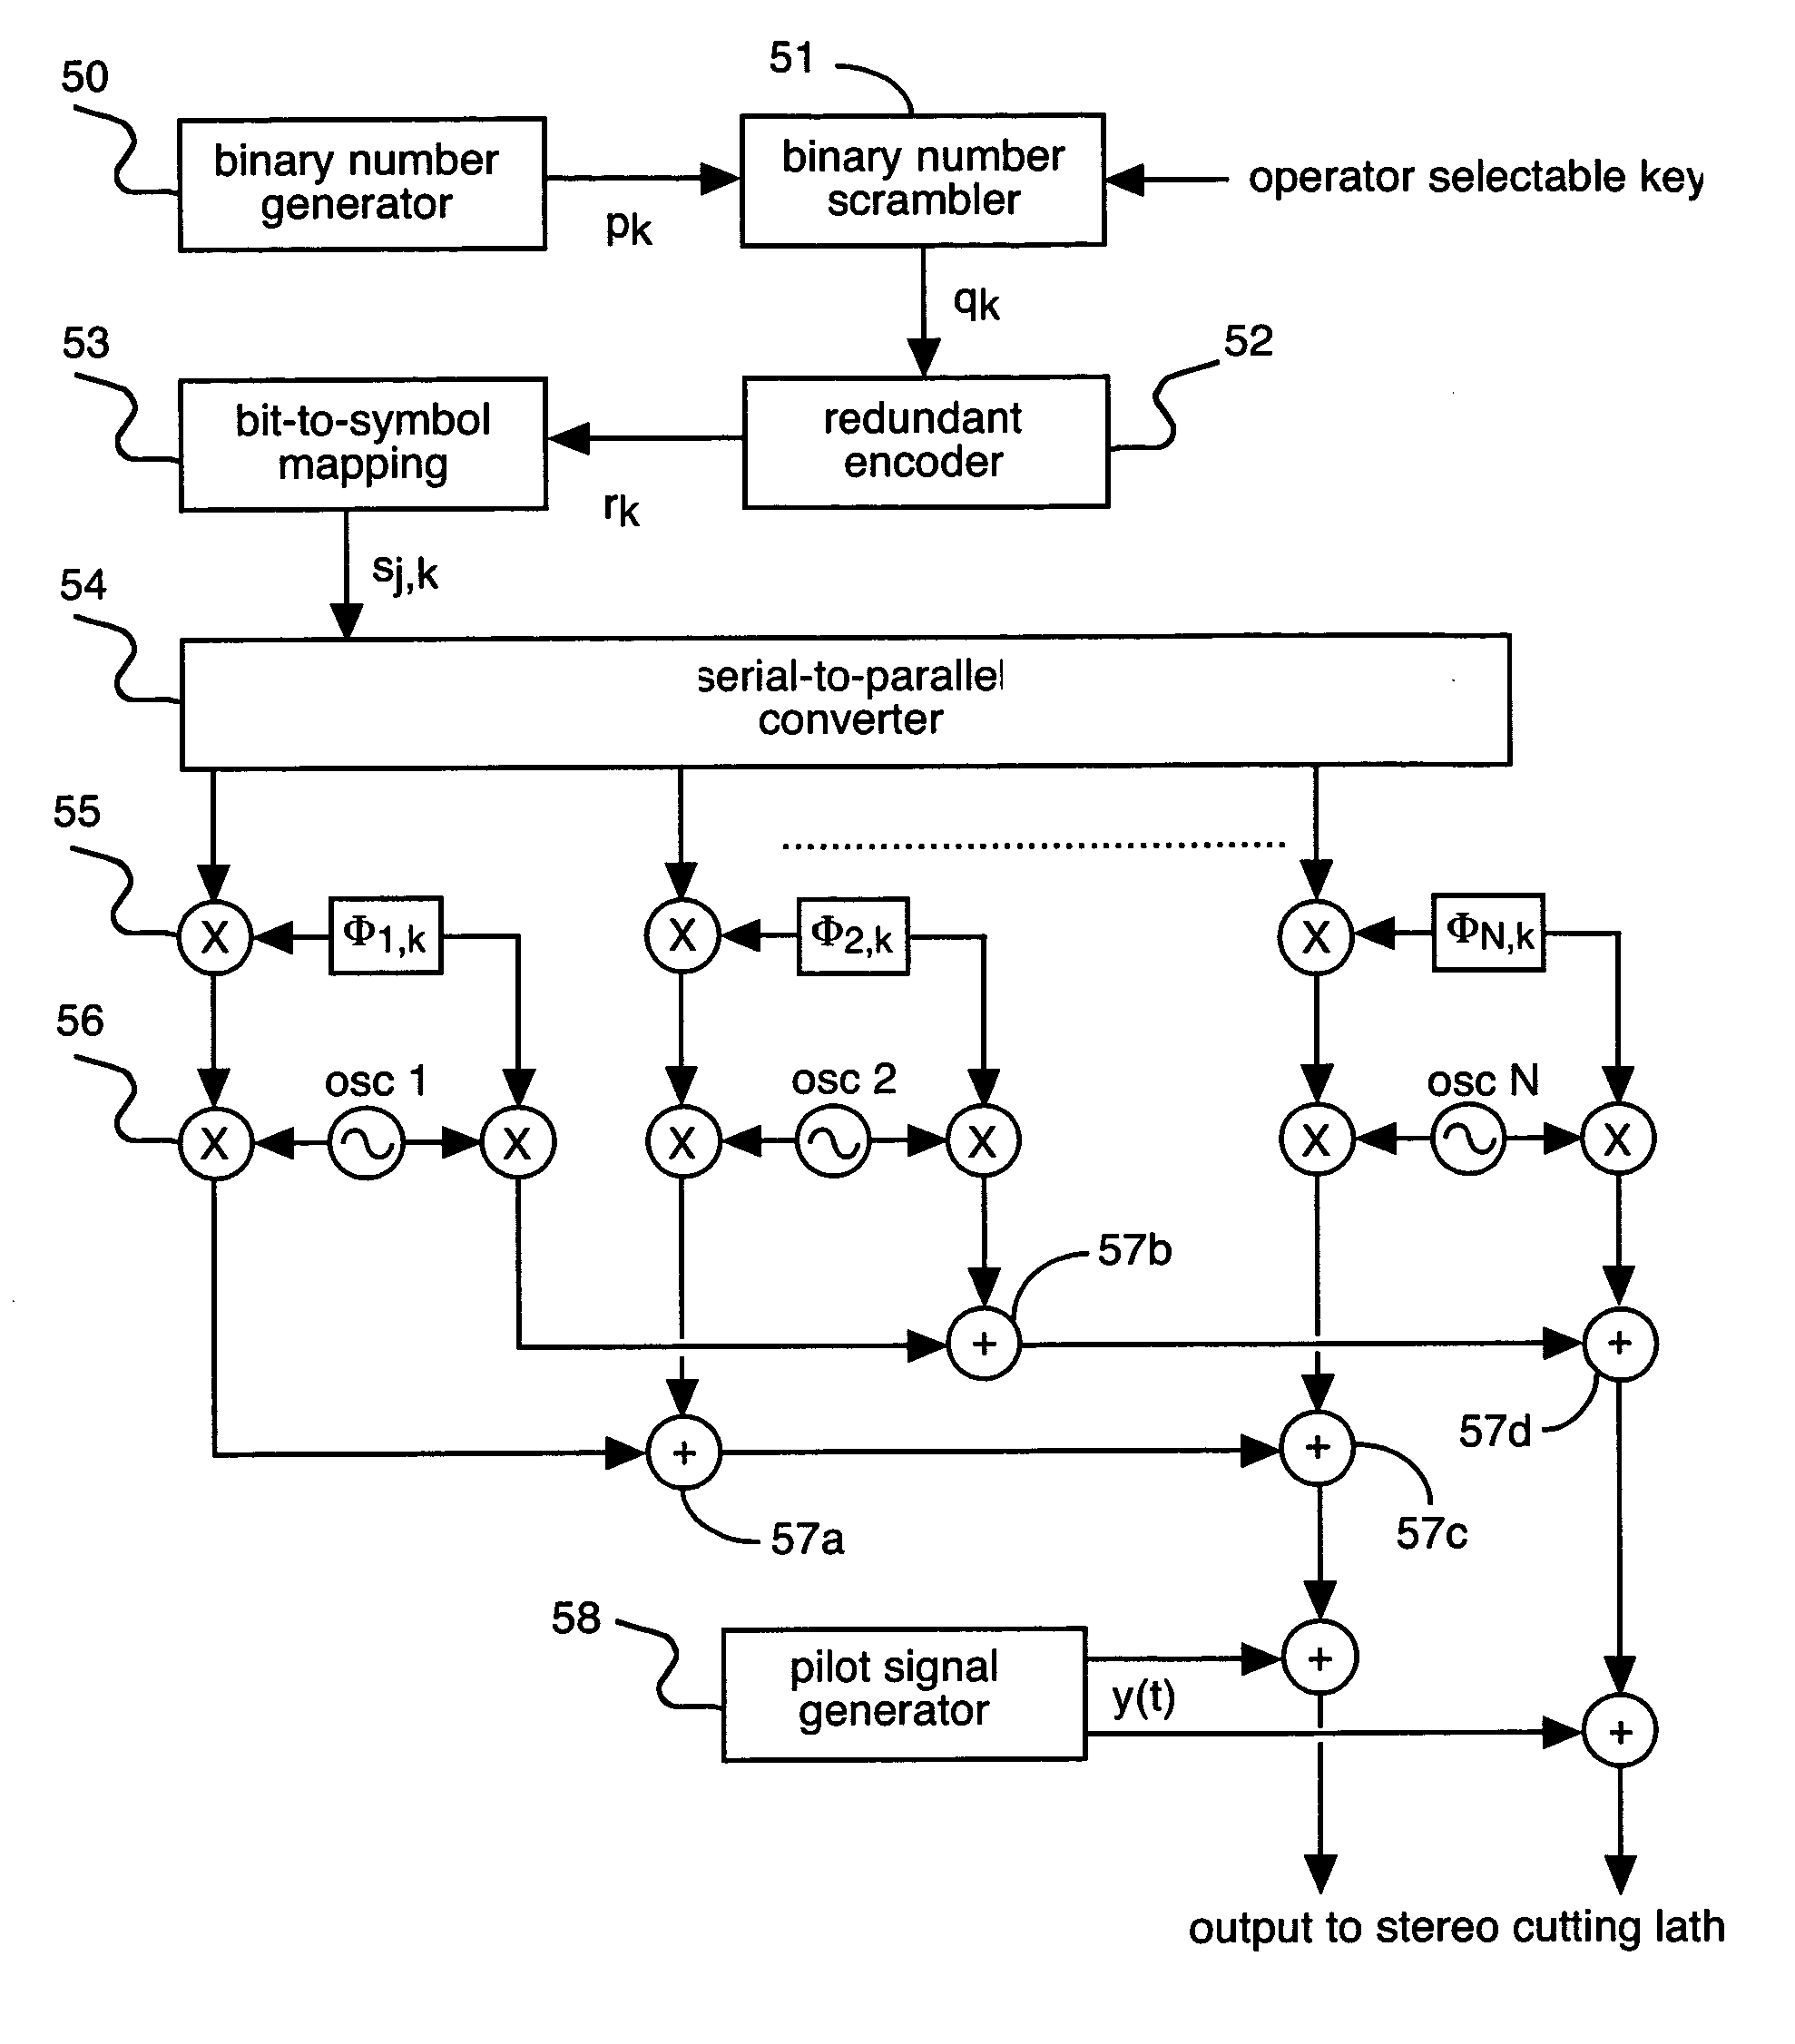 Position and velocity transducer using a phonograph disc and turntable